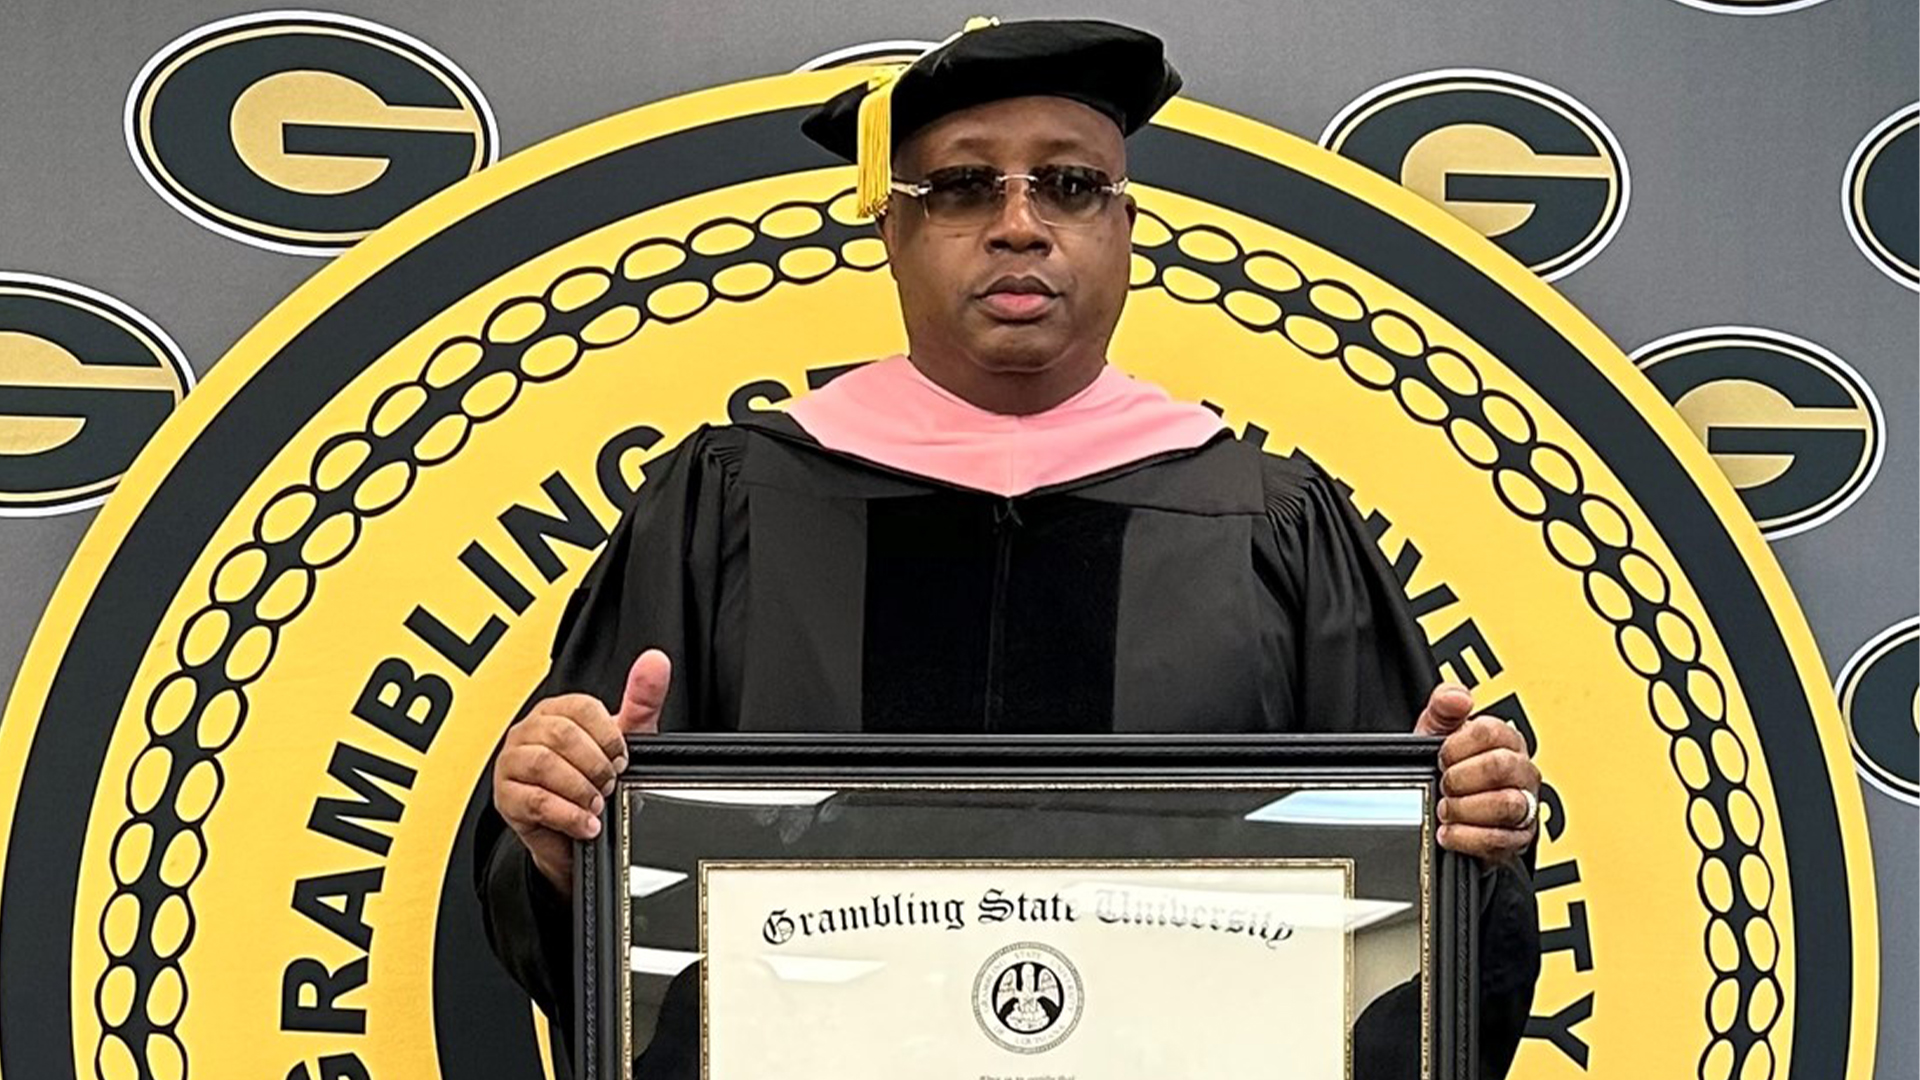 E-40 Awarded Honorary Doctorate Degree From Grambling State University